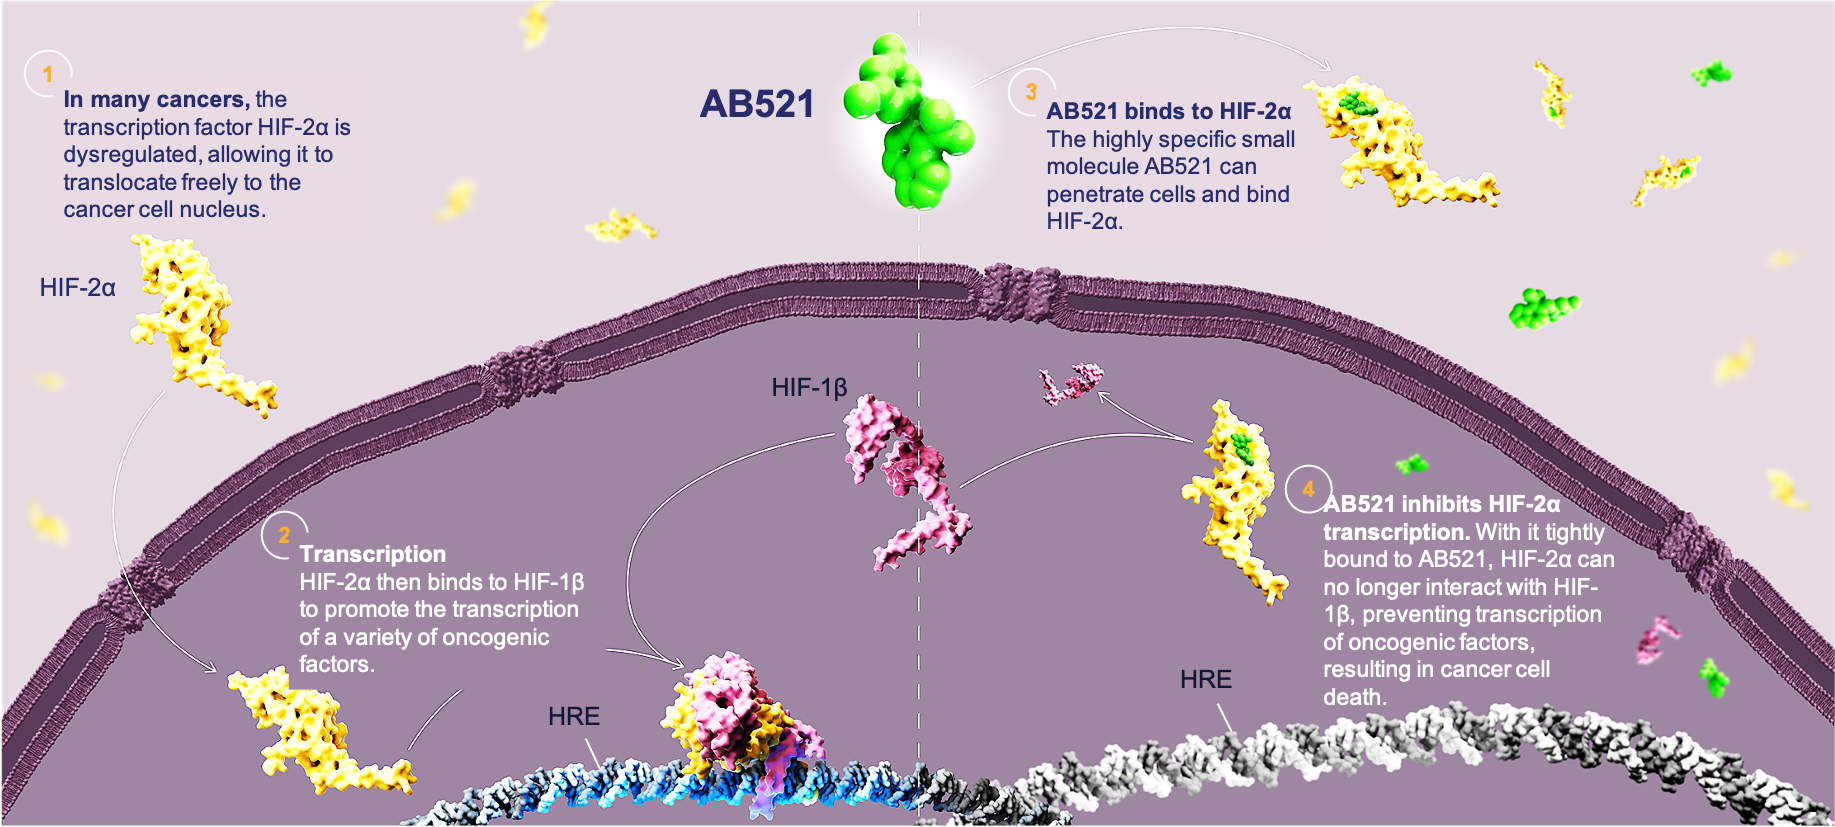 HIF-2⍺ and AB521 within the tumor cell nucleus graphic